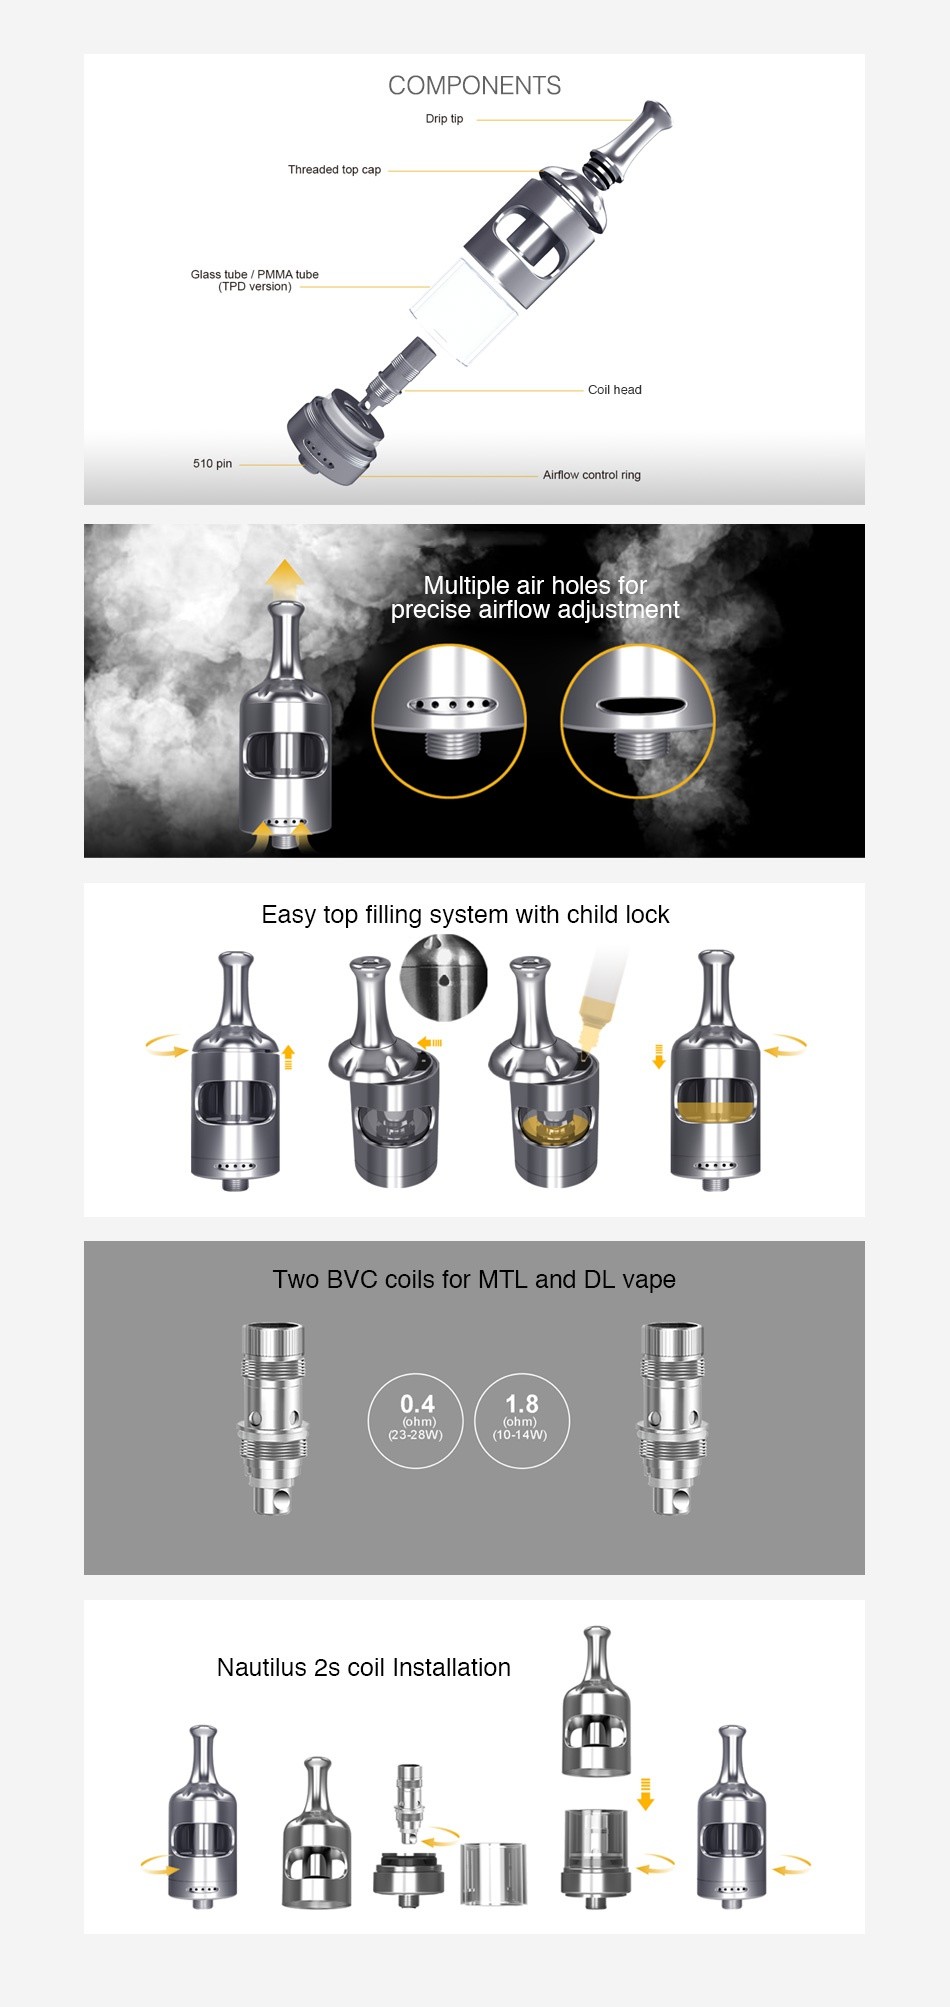 Aspire Nautilus 2S Tank 2ml/2.6ml COMPONENTS Drip ti Threaded top cap Glass tube  PMmA tube Coil head 510 pin Airflow control ring Multiple air holes for precise airflow adjustment Easy top filling system with child lock TWo BVC coils for MTL and DL vape 0 4 1 8 2328W   10 14W H Nautilus 2s coil installation     1